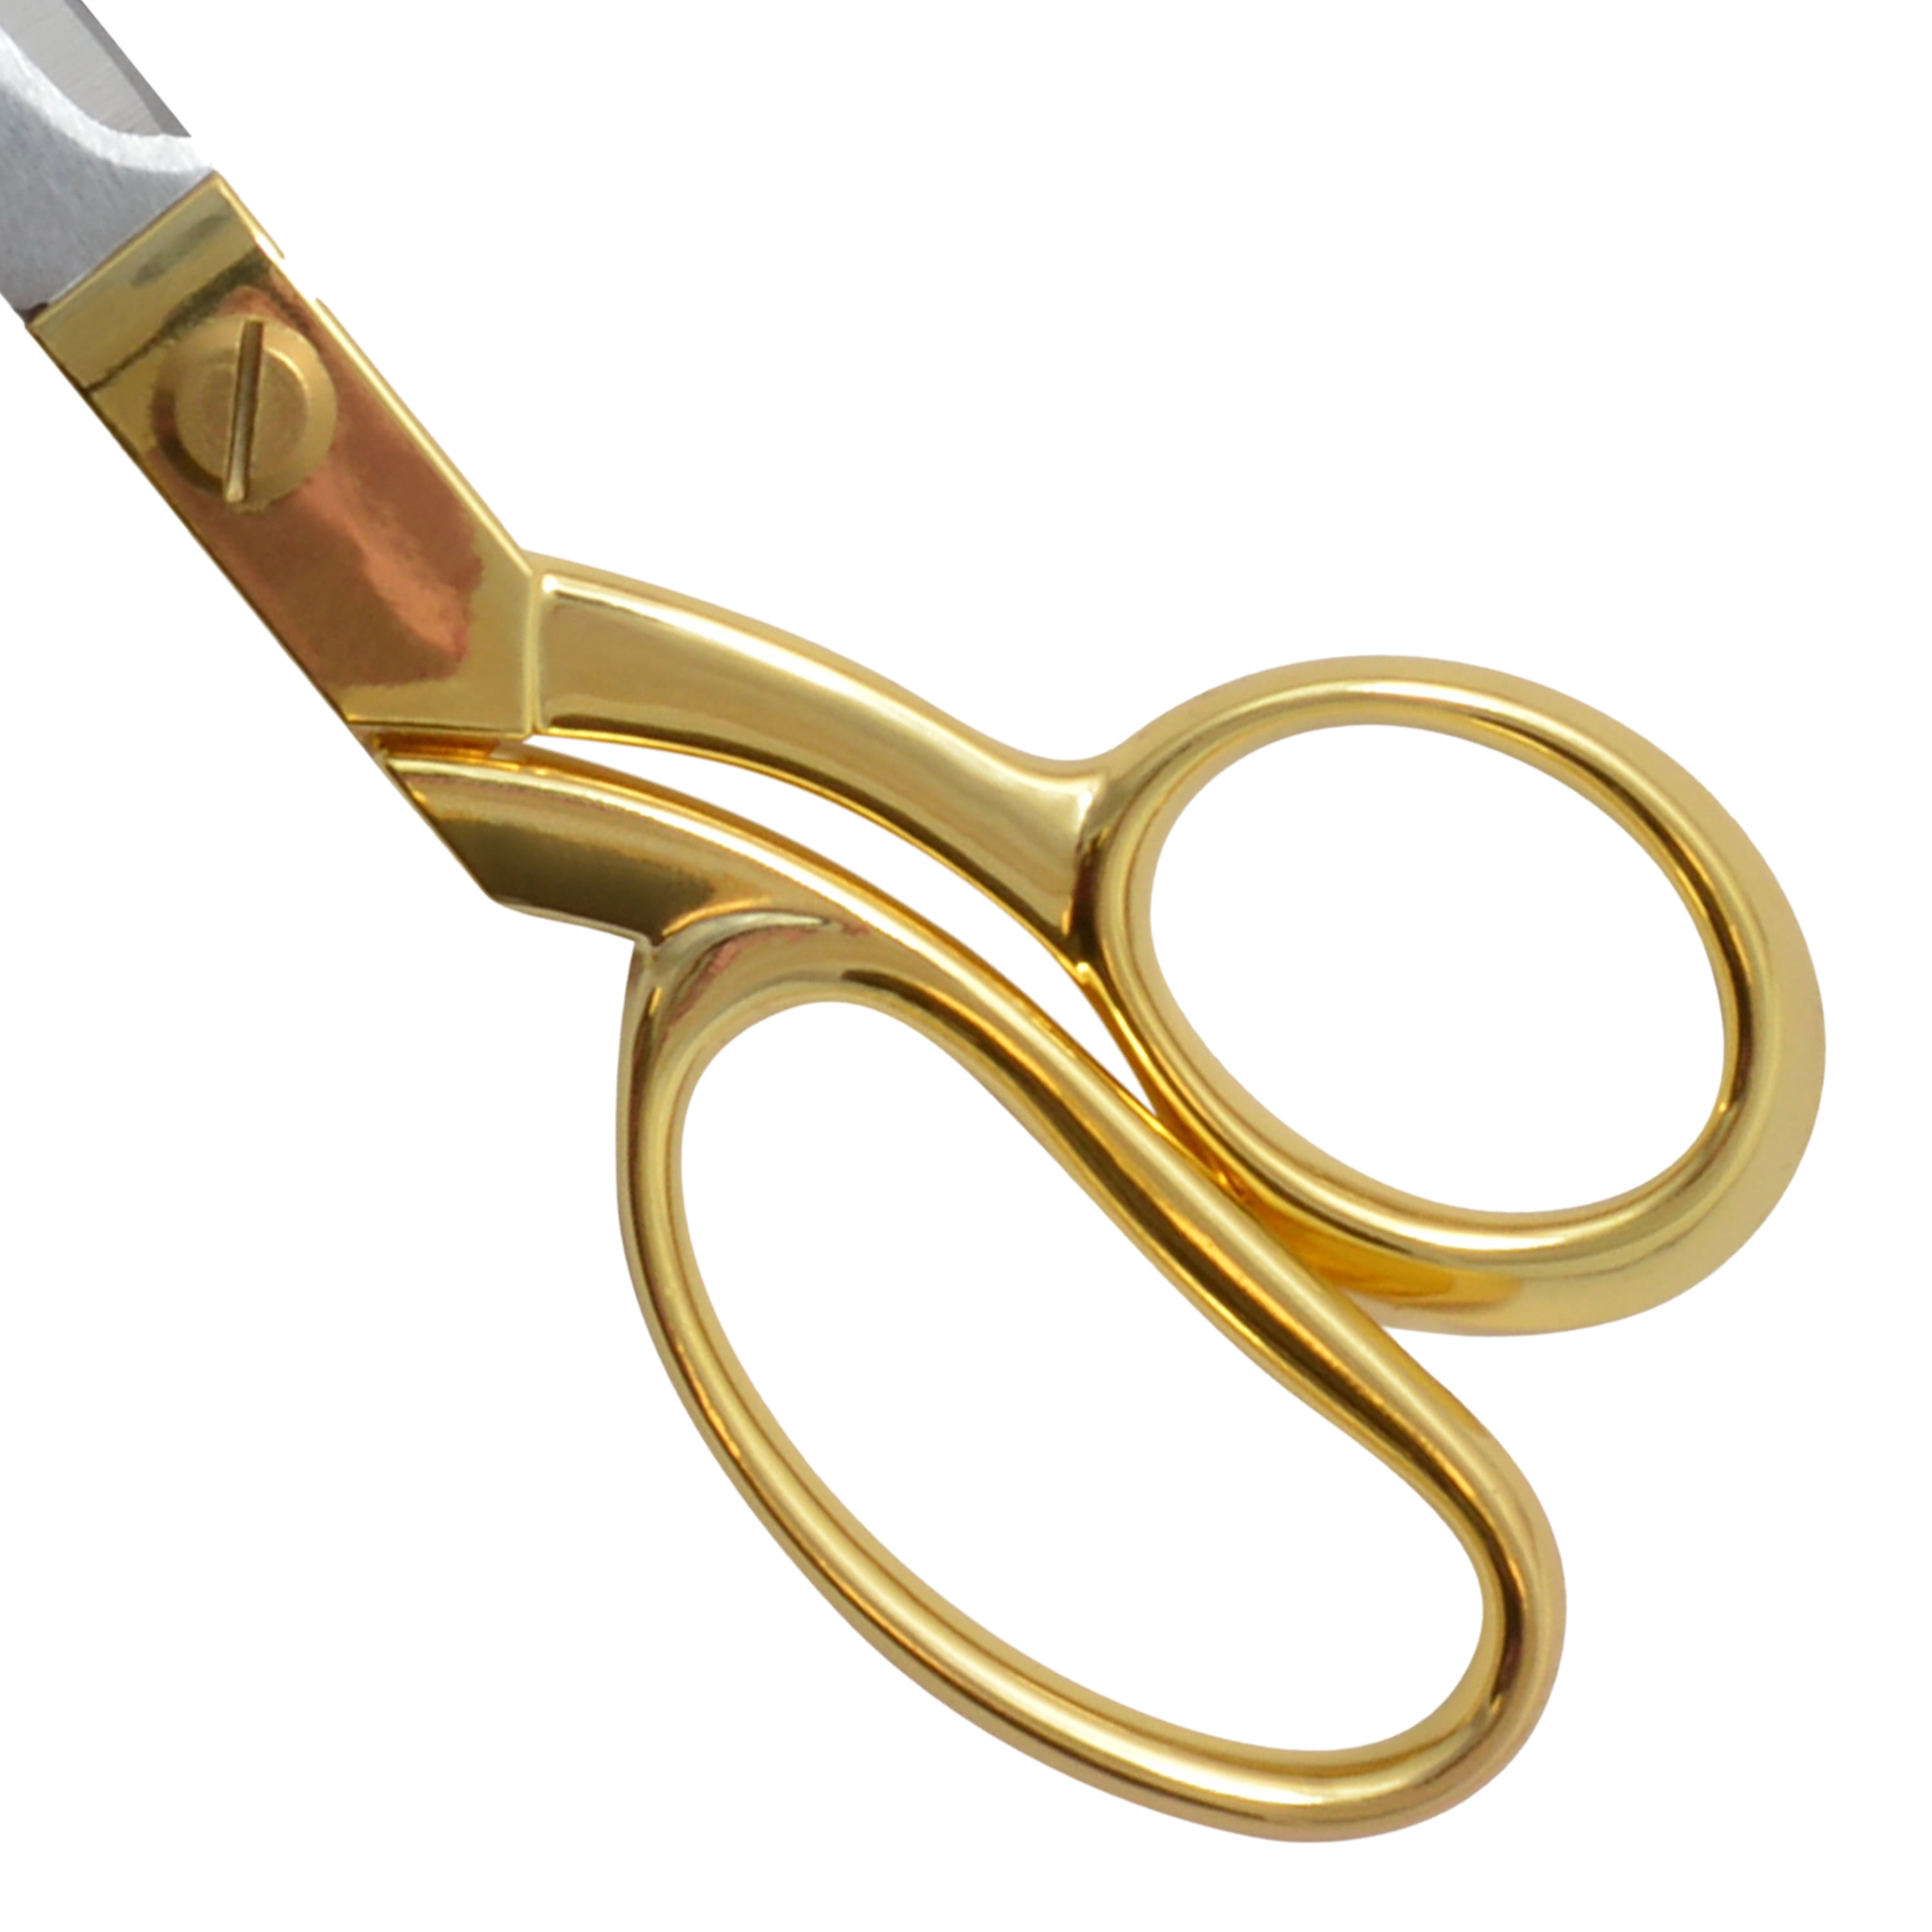 9 Clear Acrylic Scissors, Gold Tone High Quality Sheers, Bent